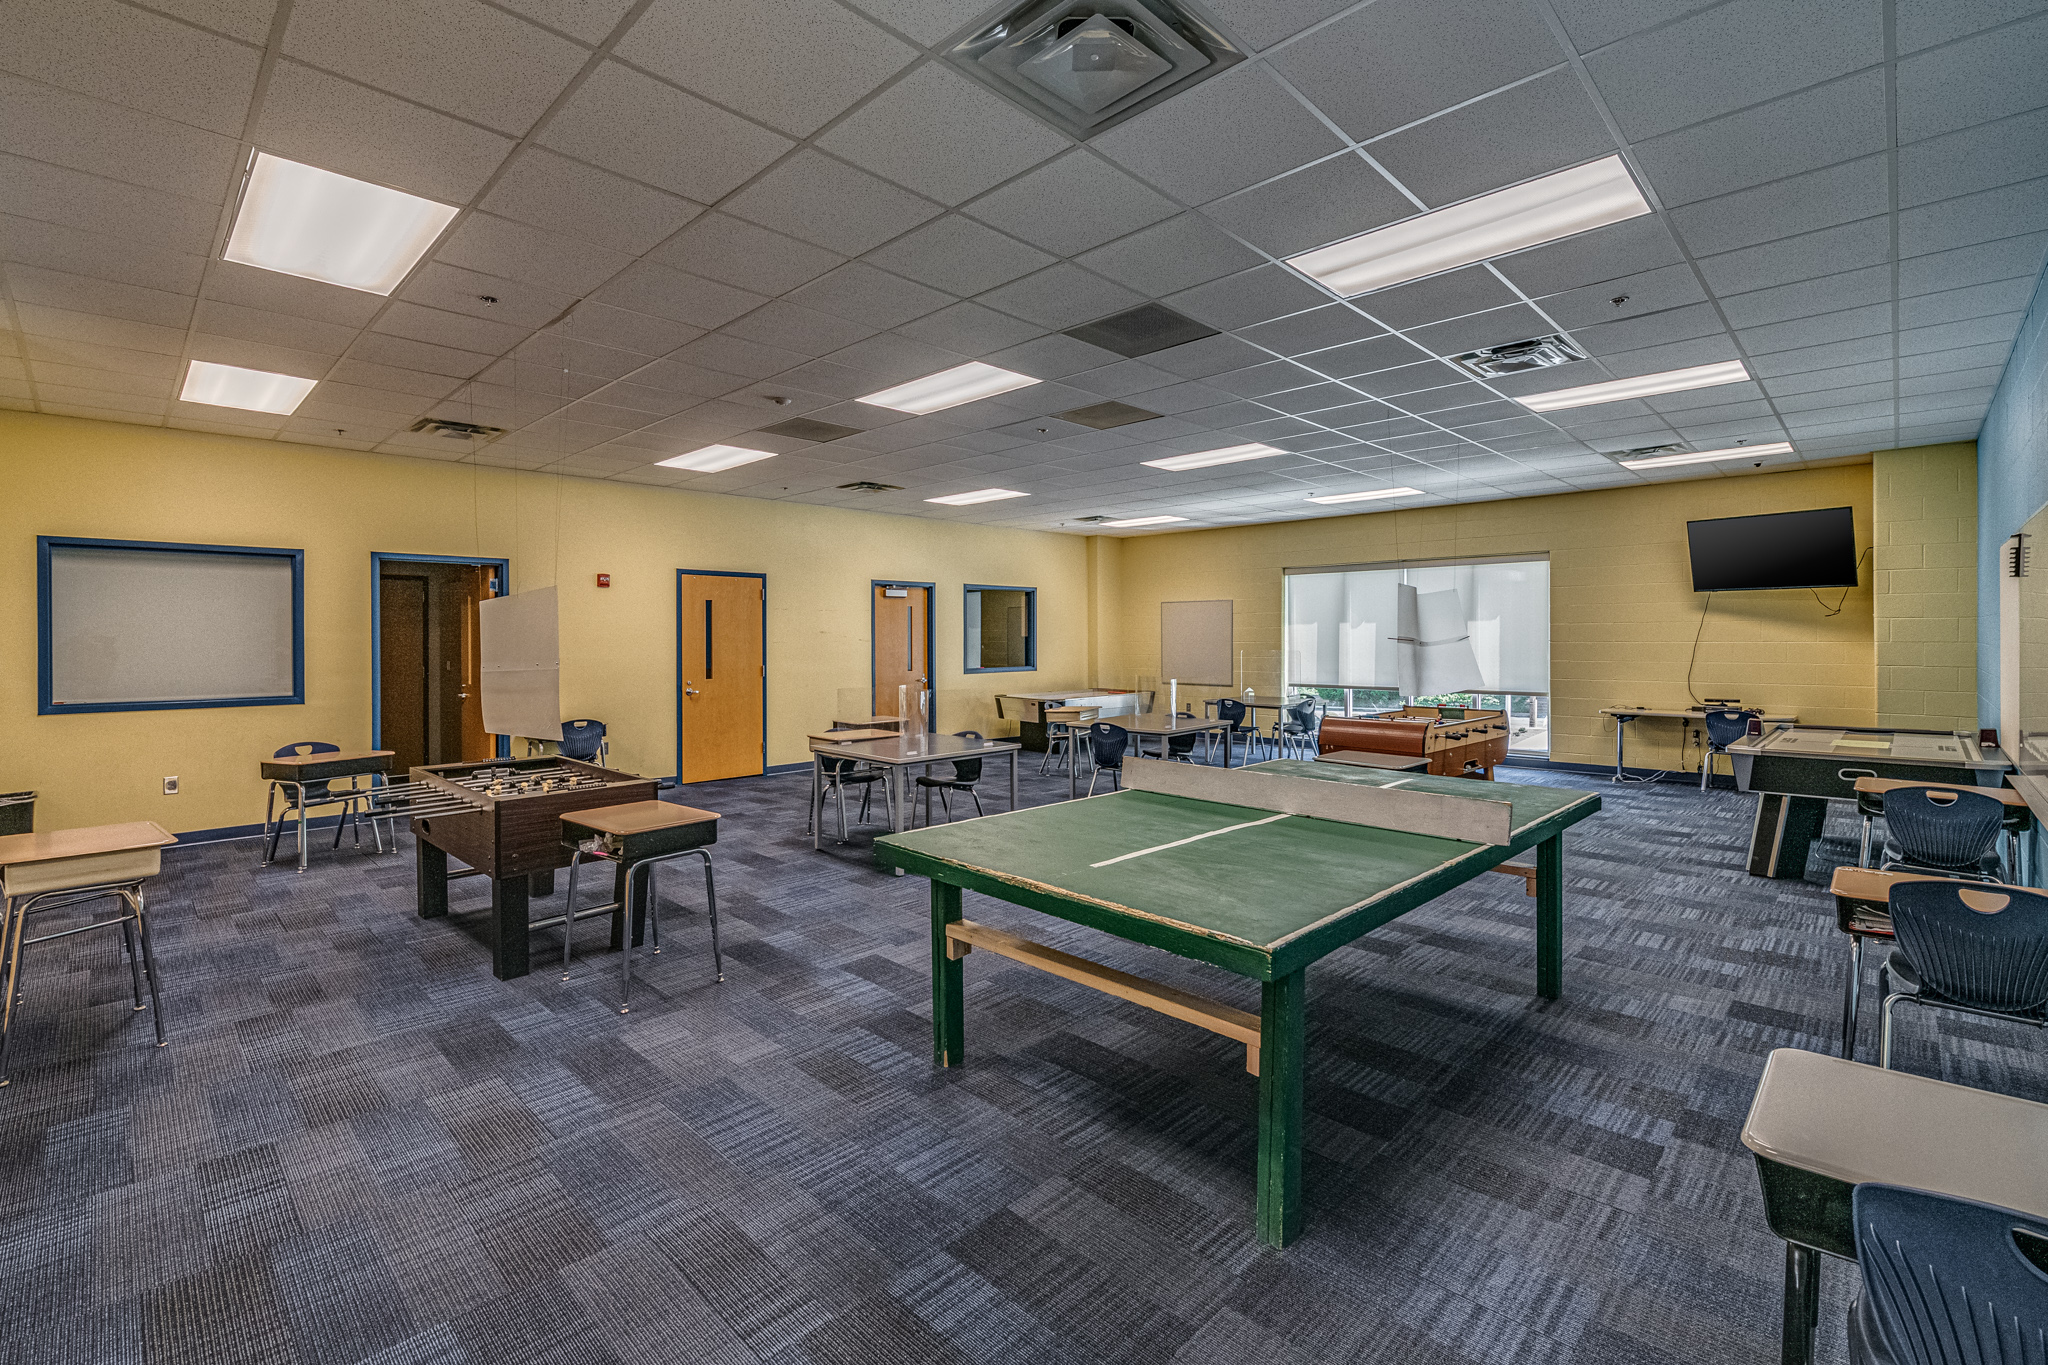 A community room with a ping pong table at the Boys and Girls Club of Cabarrus County